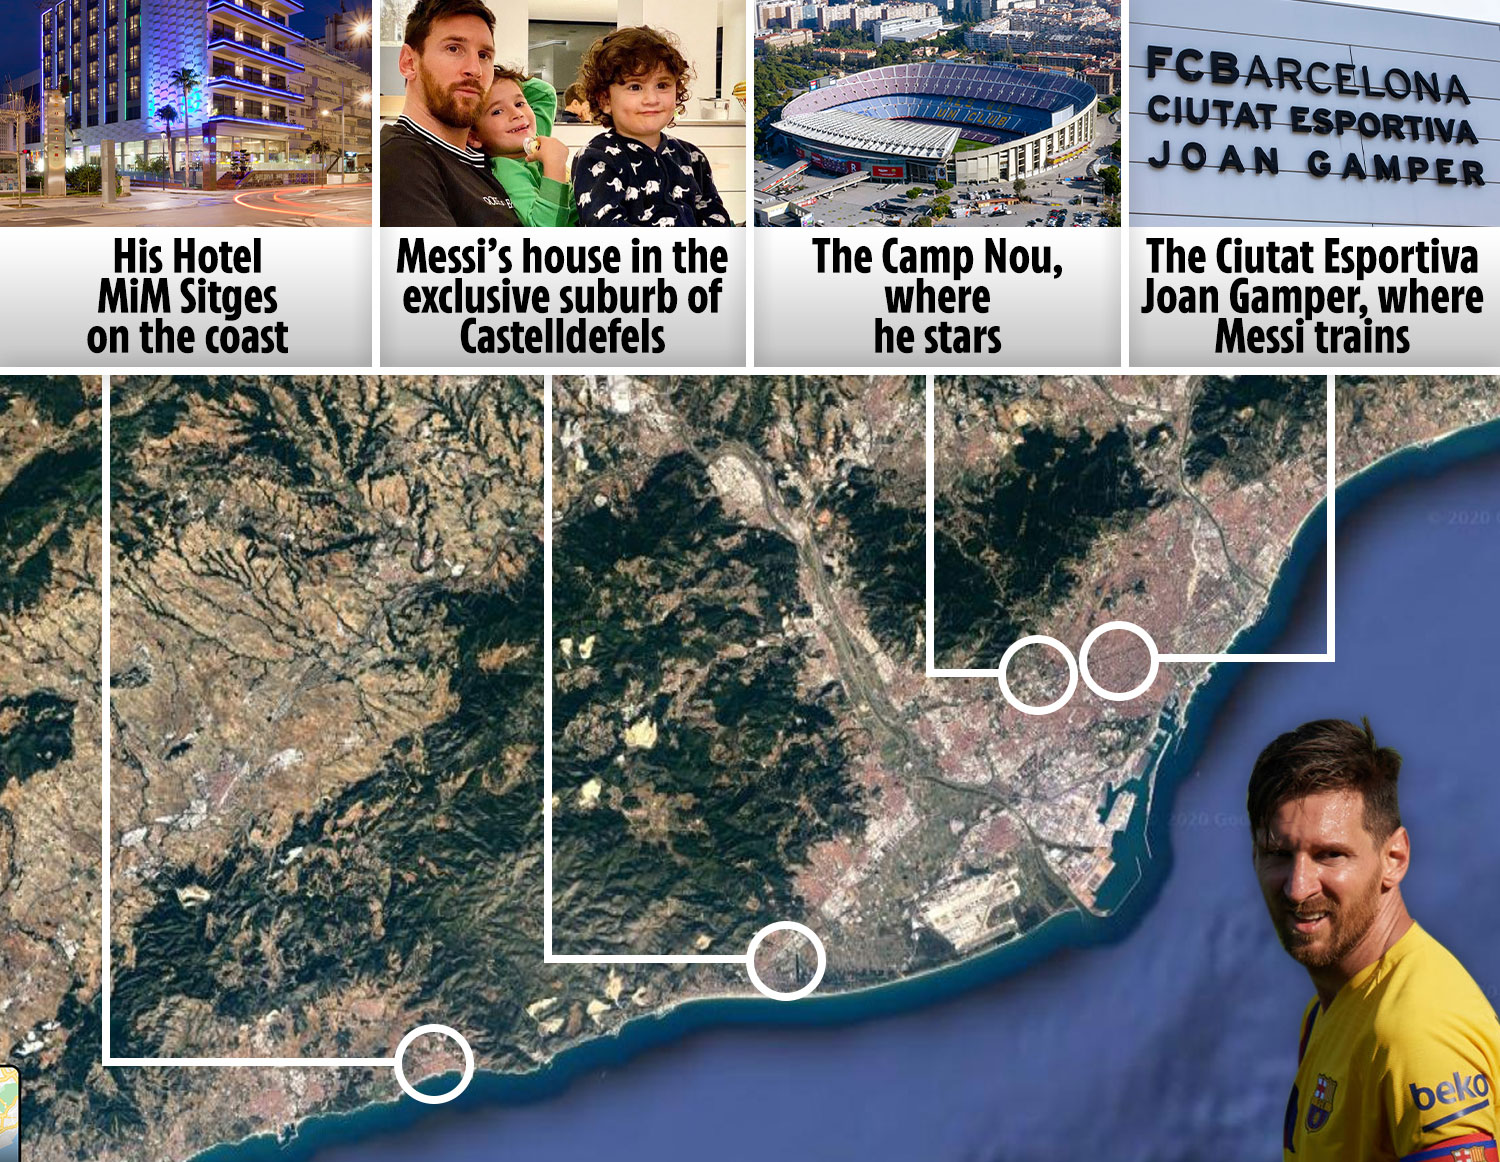 Lionel Messi has built an incredible lifestyle in Barcelona - but could now be going elsewhere